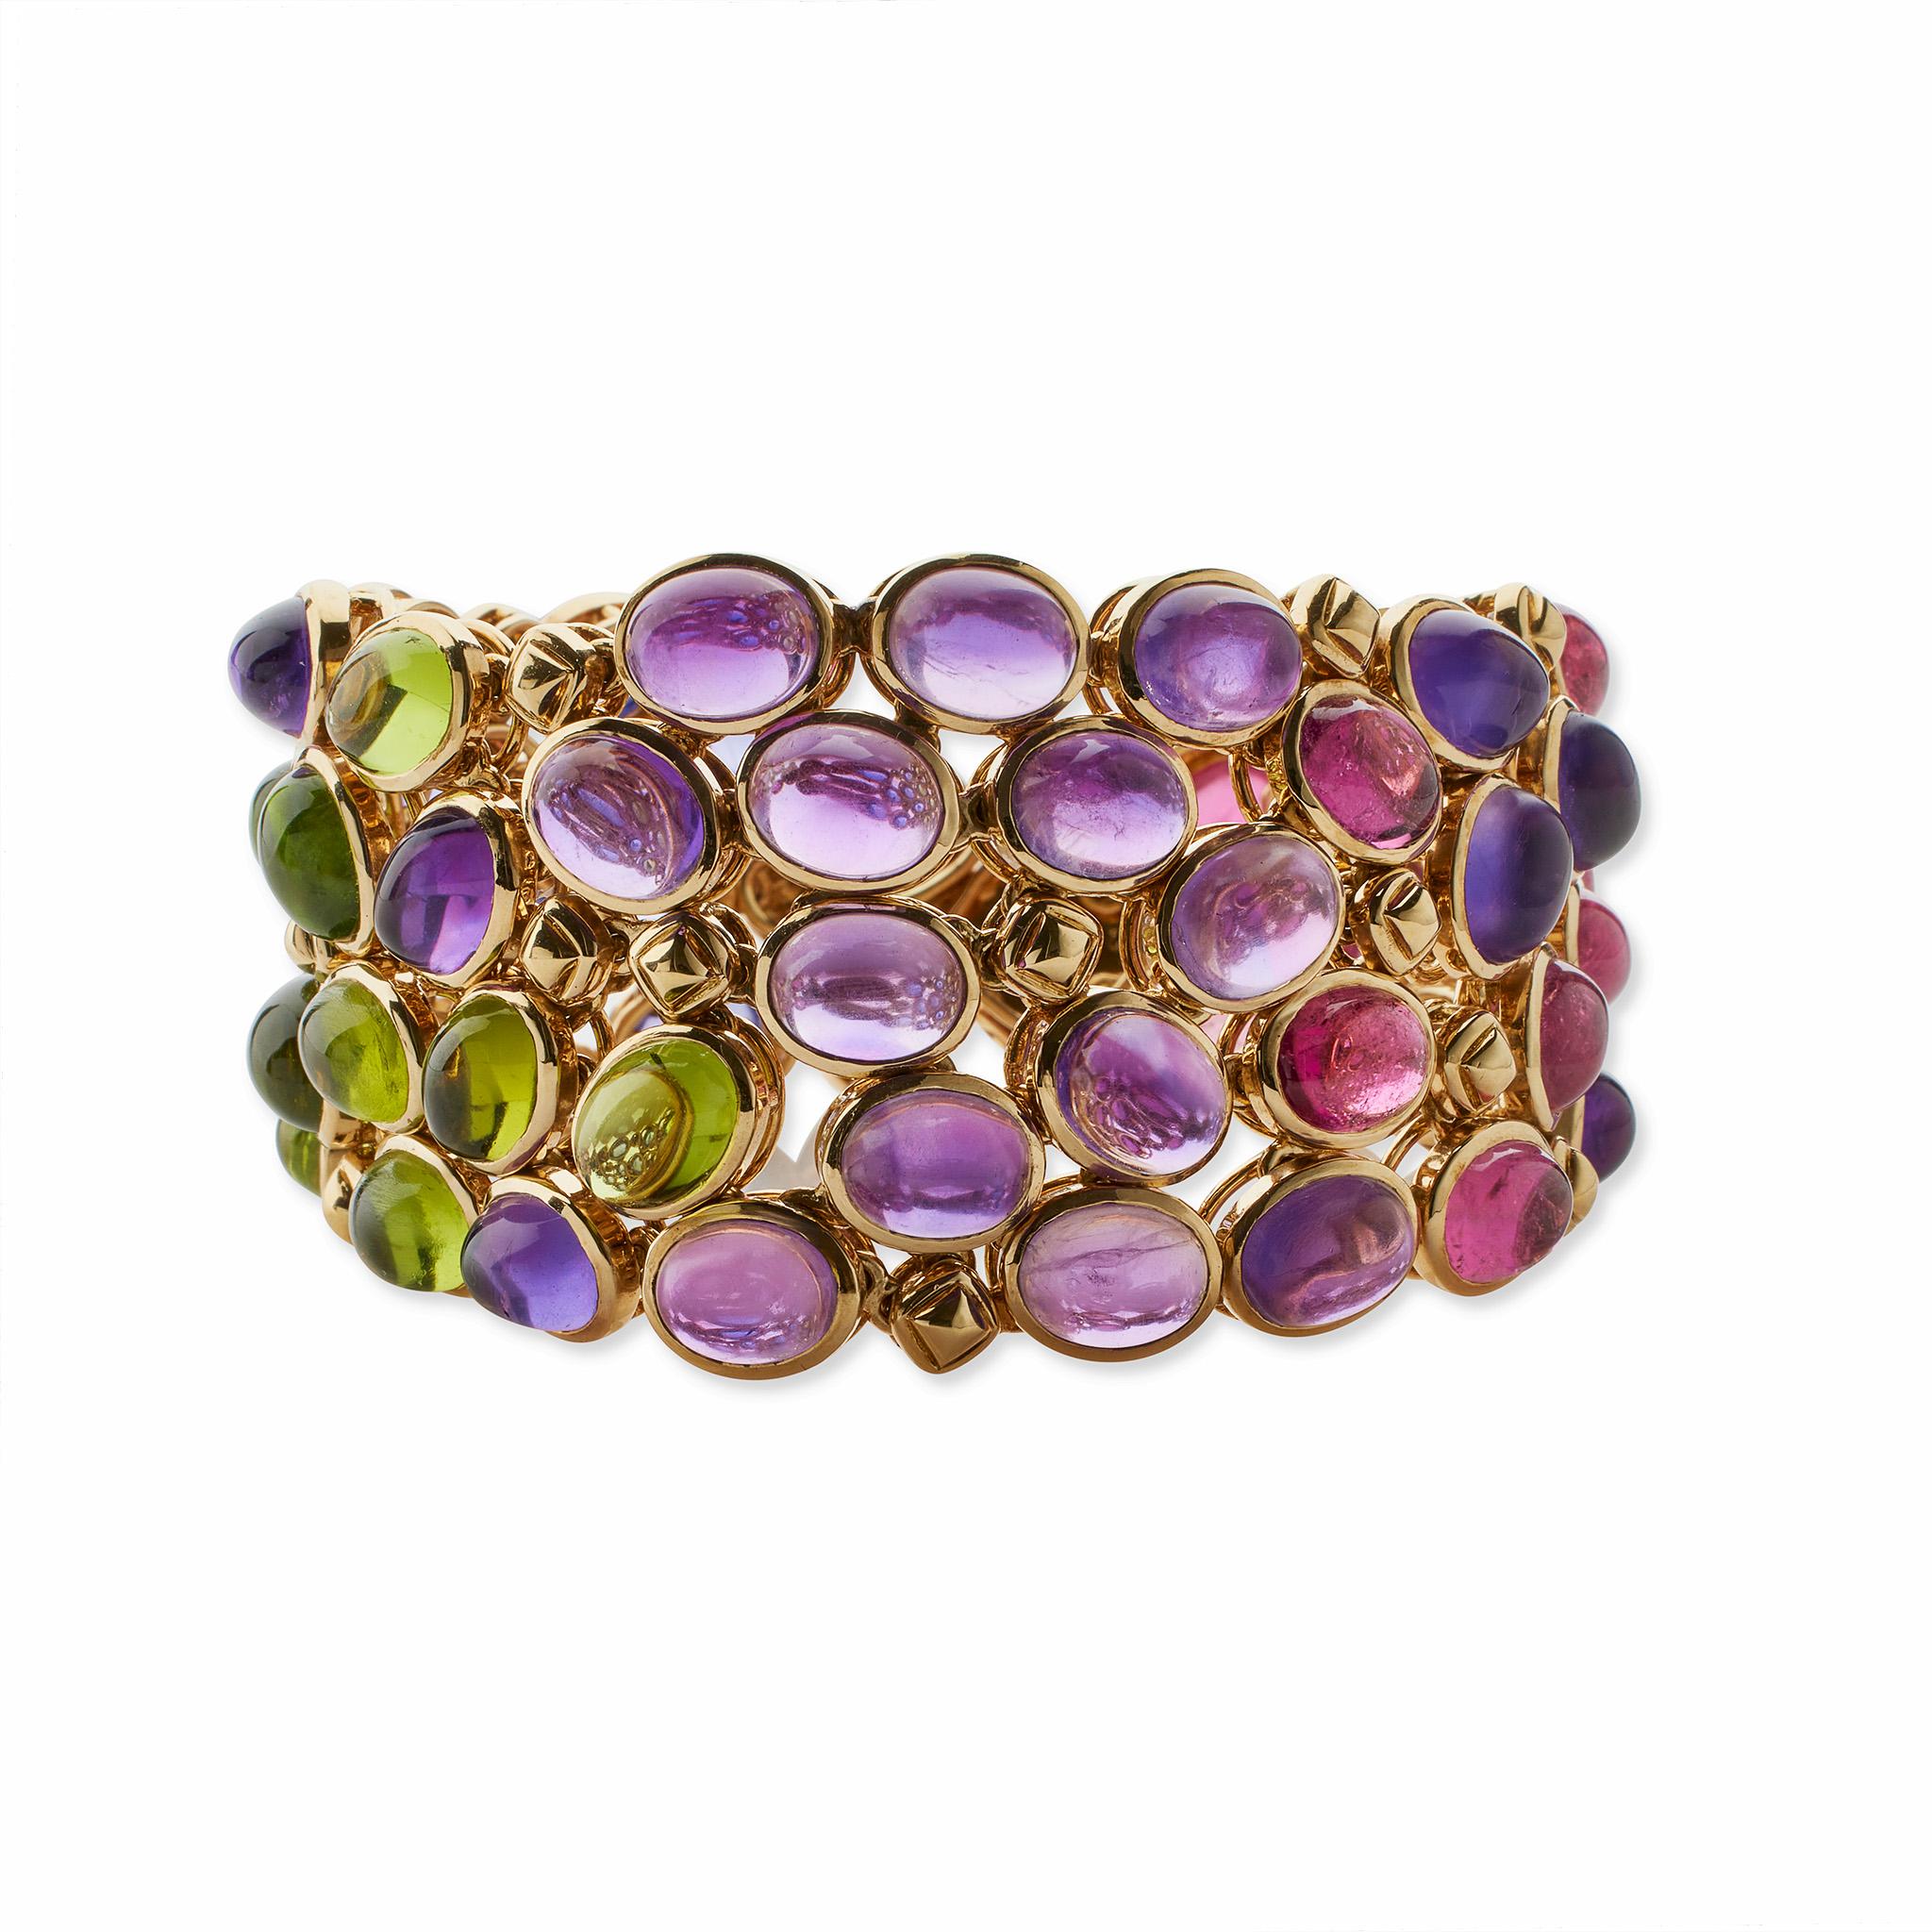 René Boivin Sapphire, Pink Tourmaline, Peridot and Amethyst Bracelet In Excellent Condition For Sale In New York, NY